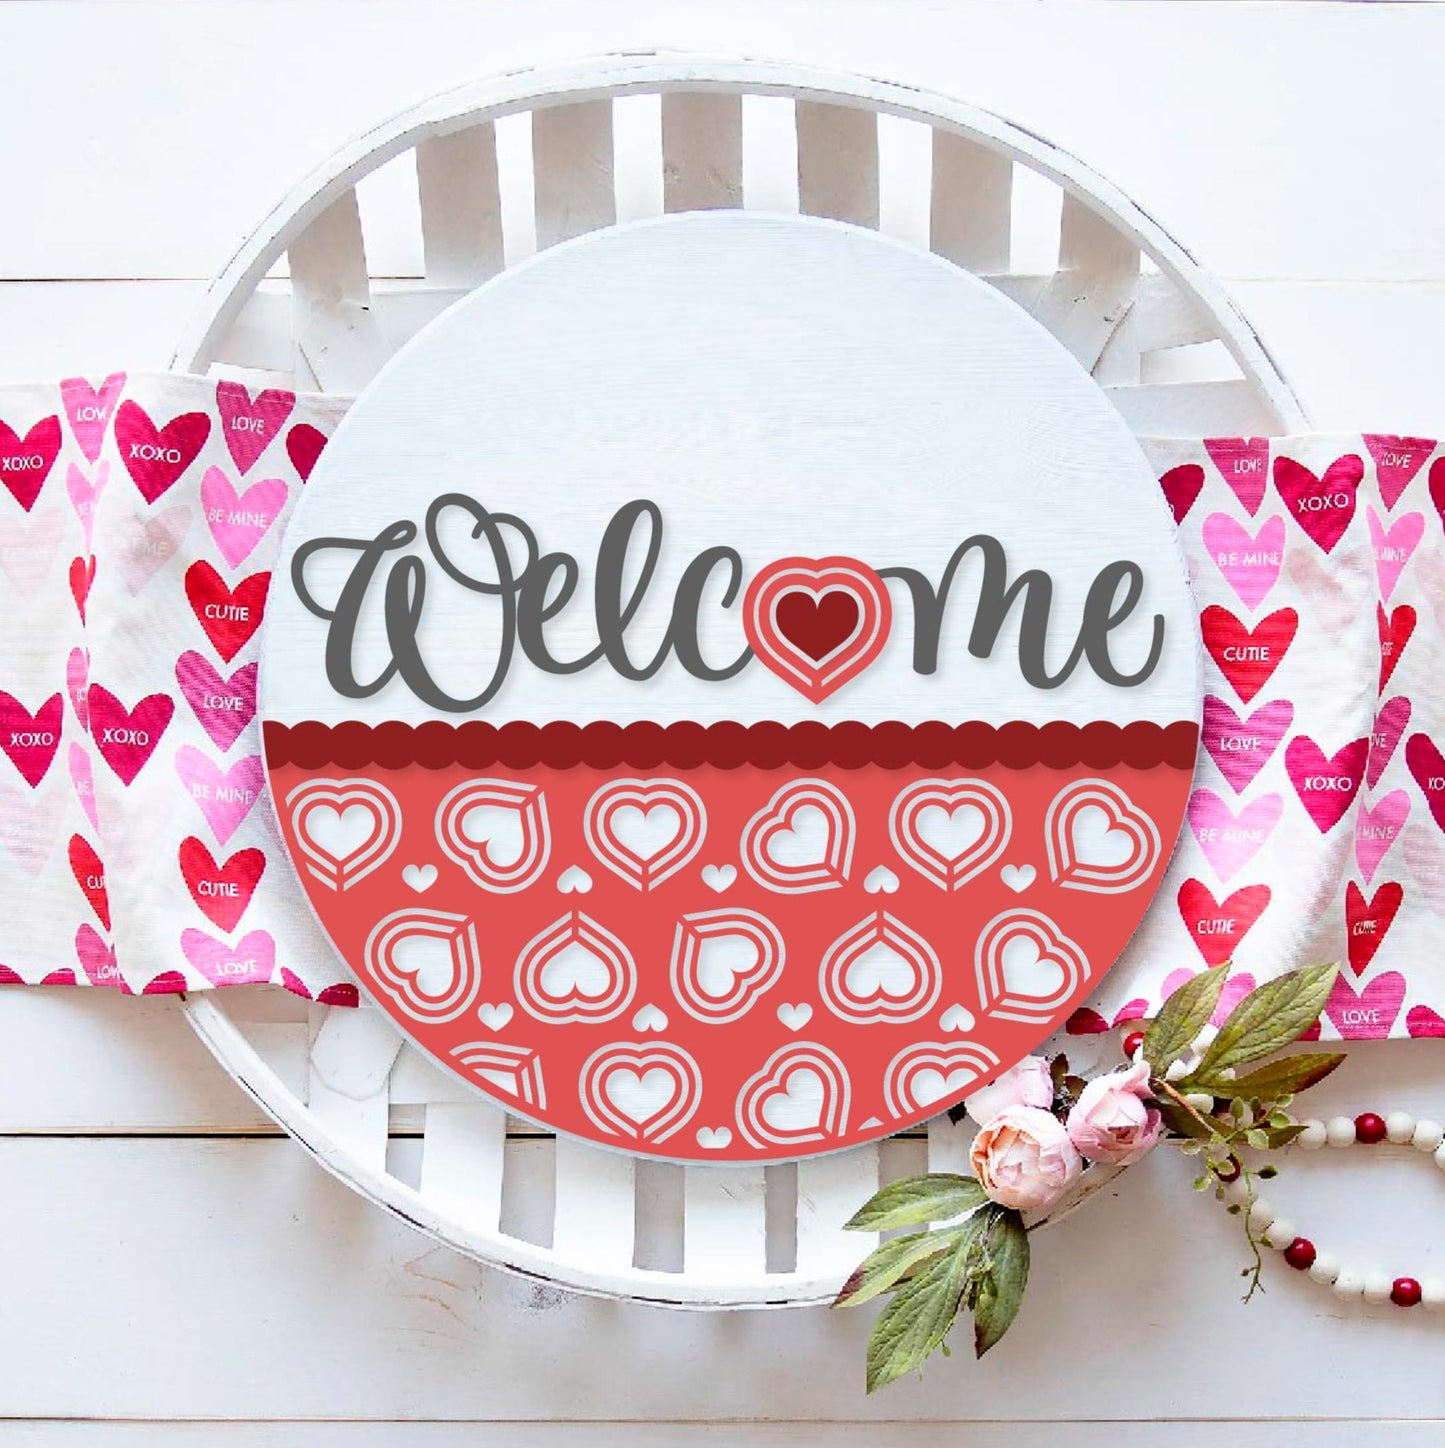 Welcome hearts Valentine sign